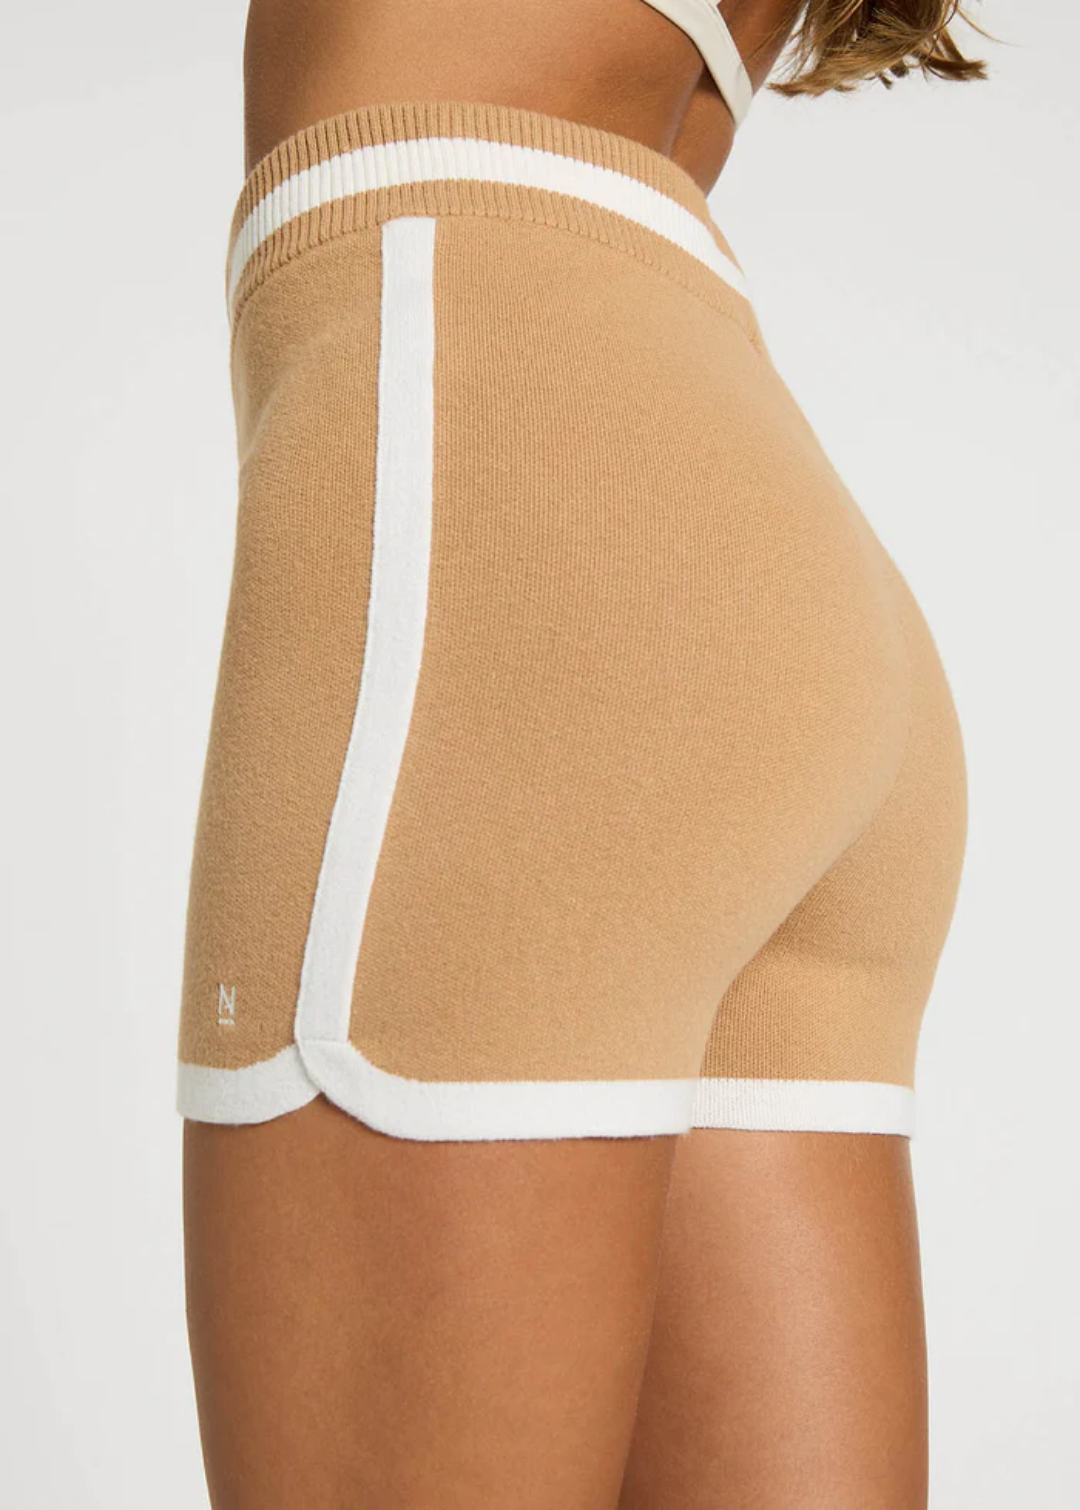 Everyday Knit Short 10cm - Cappuccino Activewear by Nimble - Prae Wellness